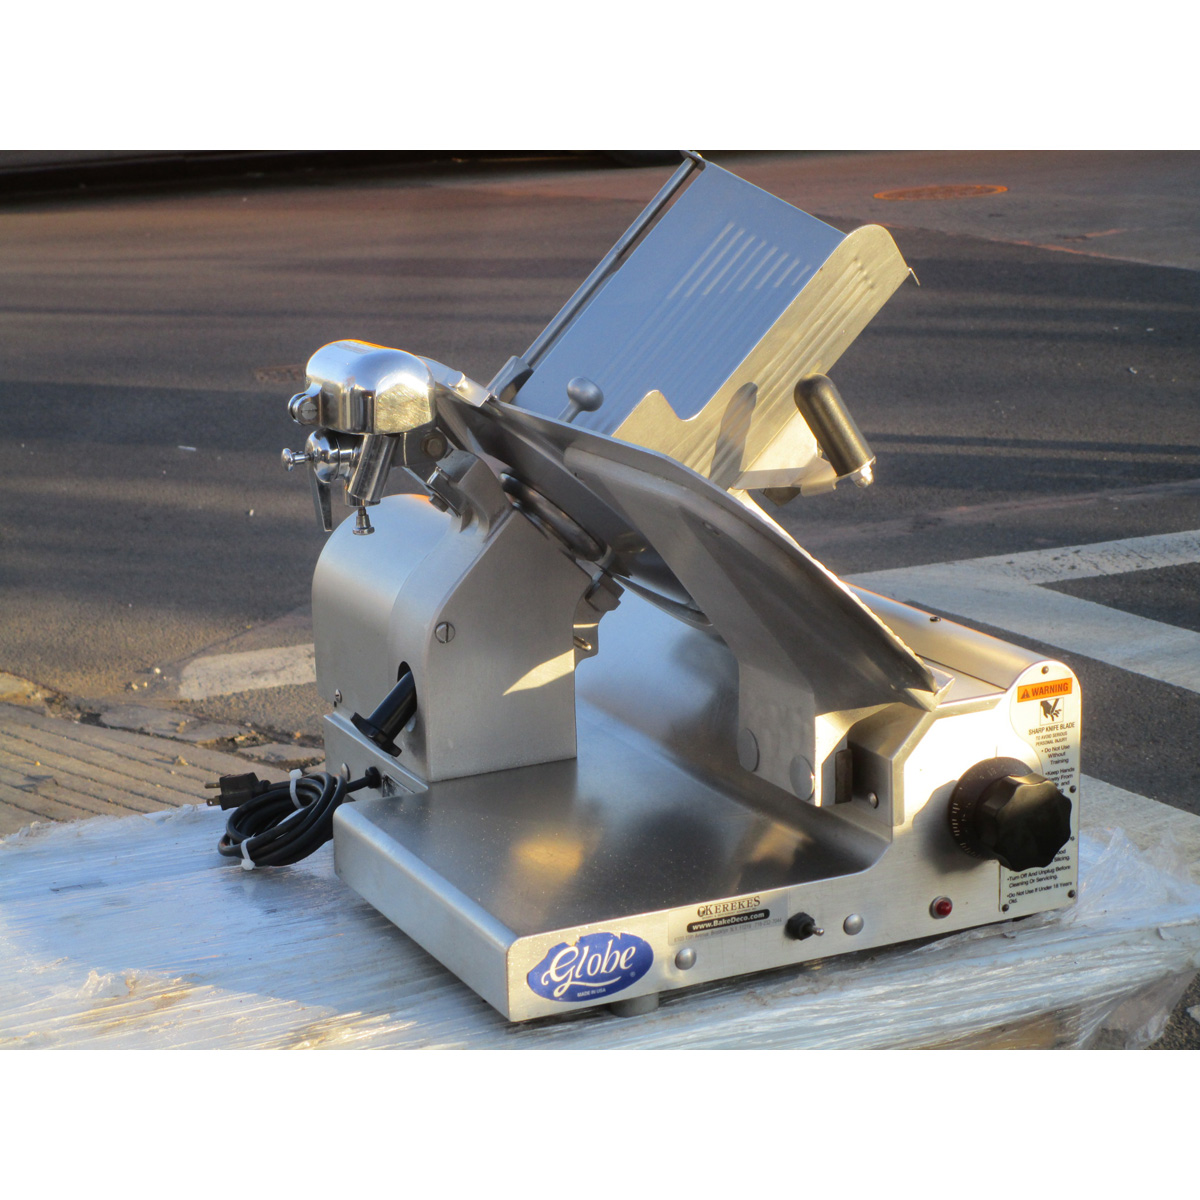 Globe 3500 Meat Slicer 0.5 HP, Used Excellent Condition